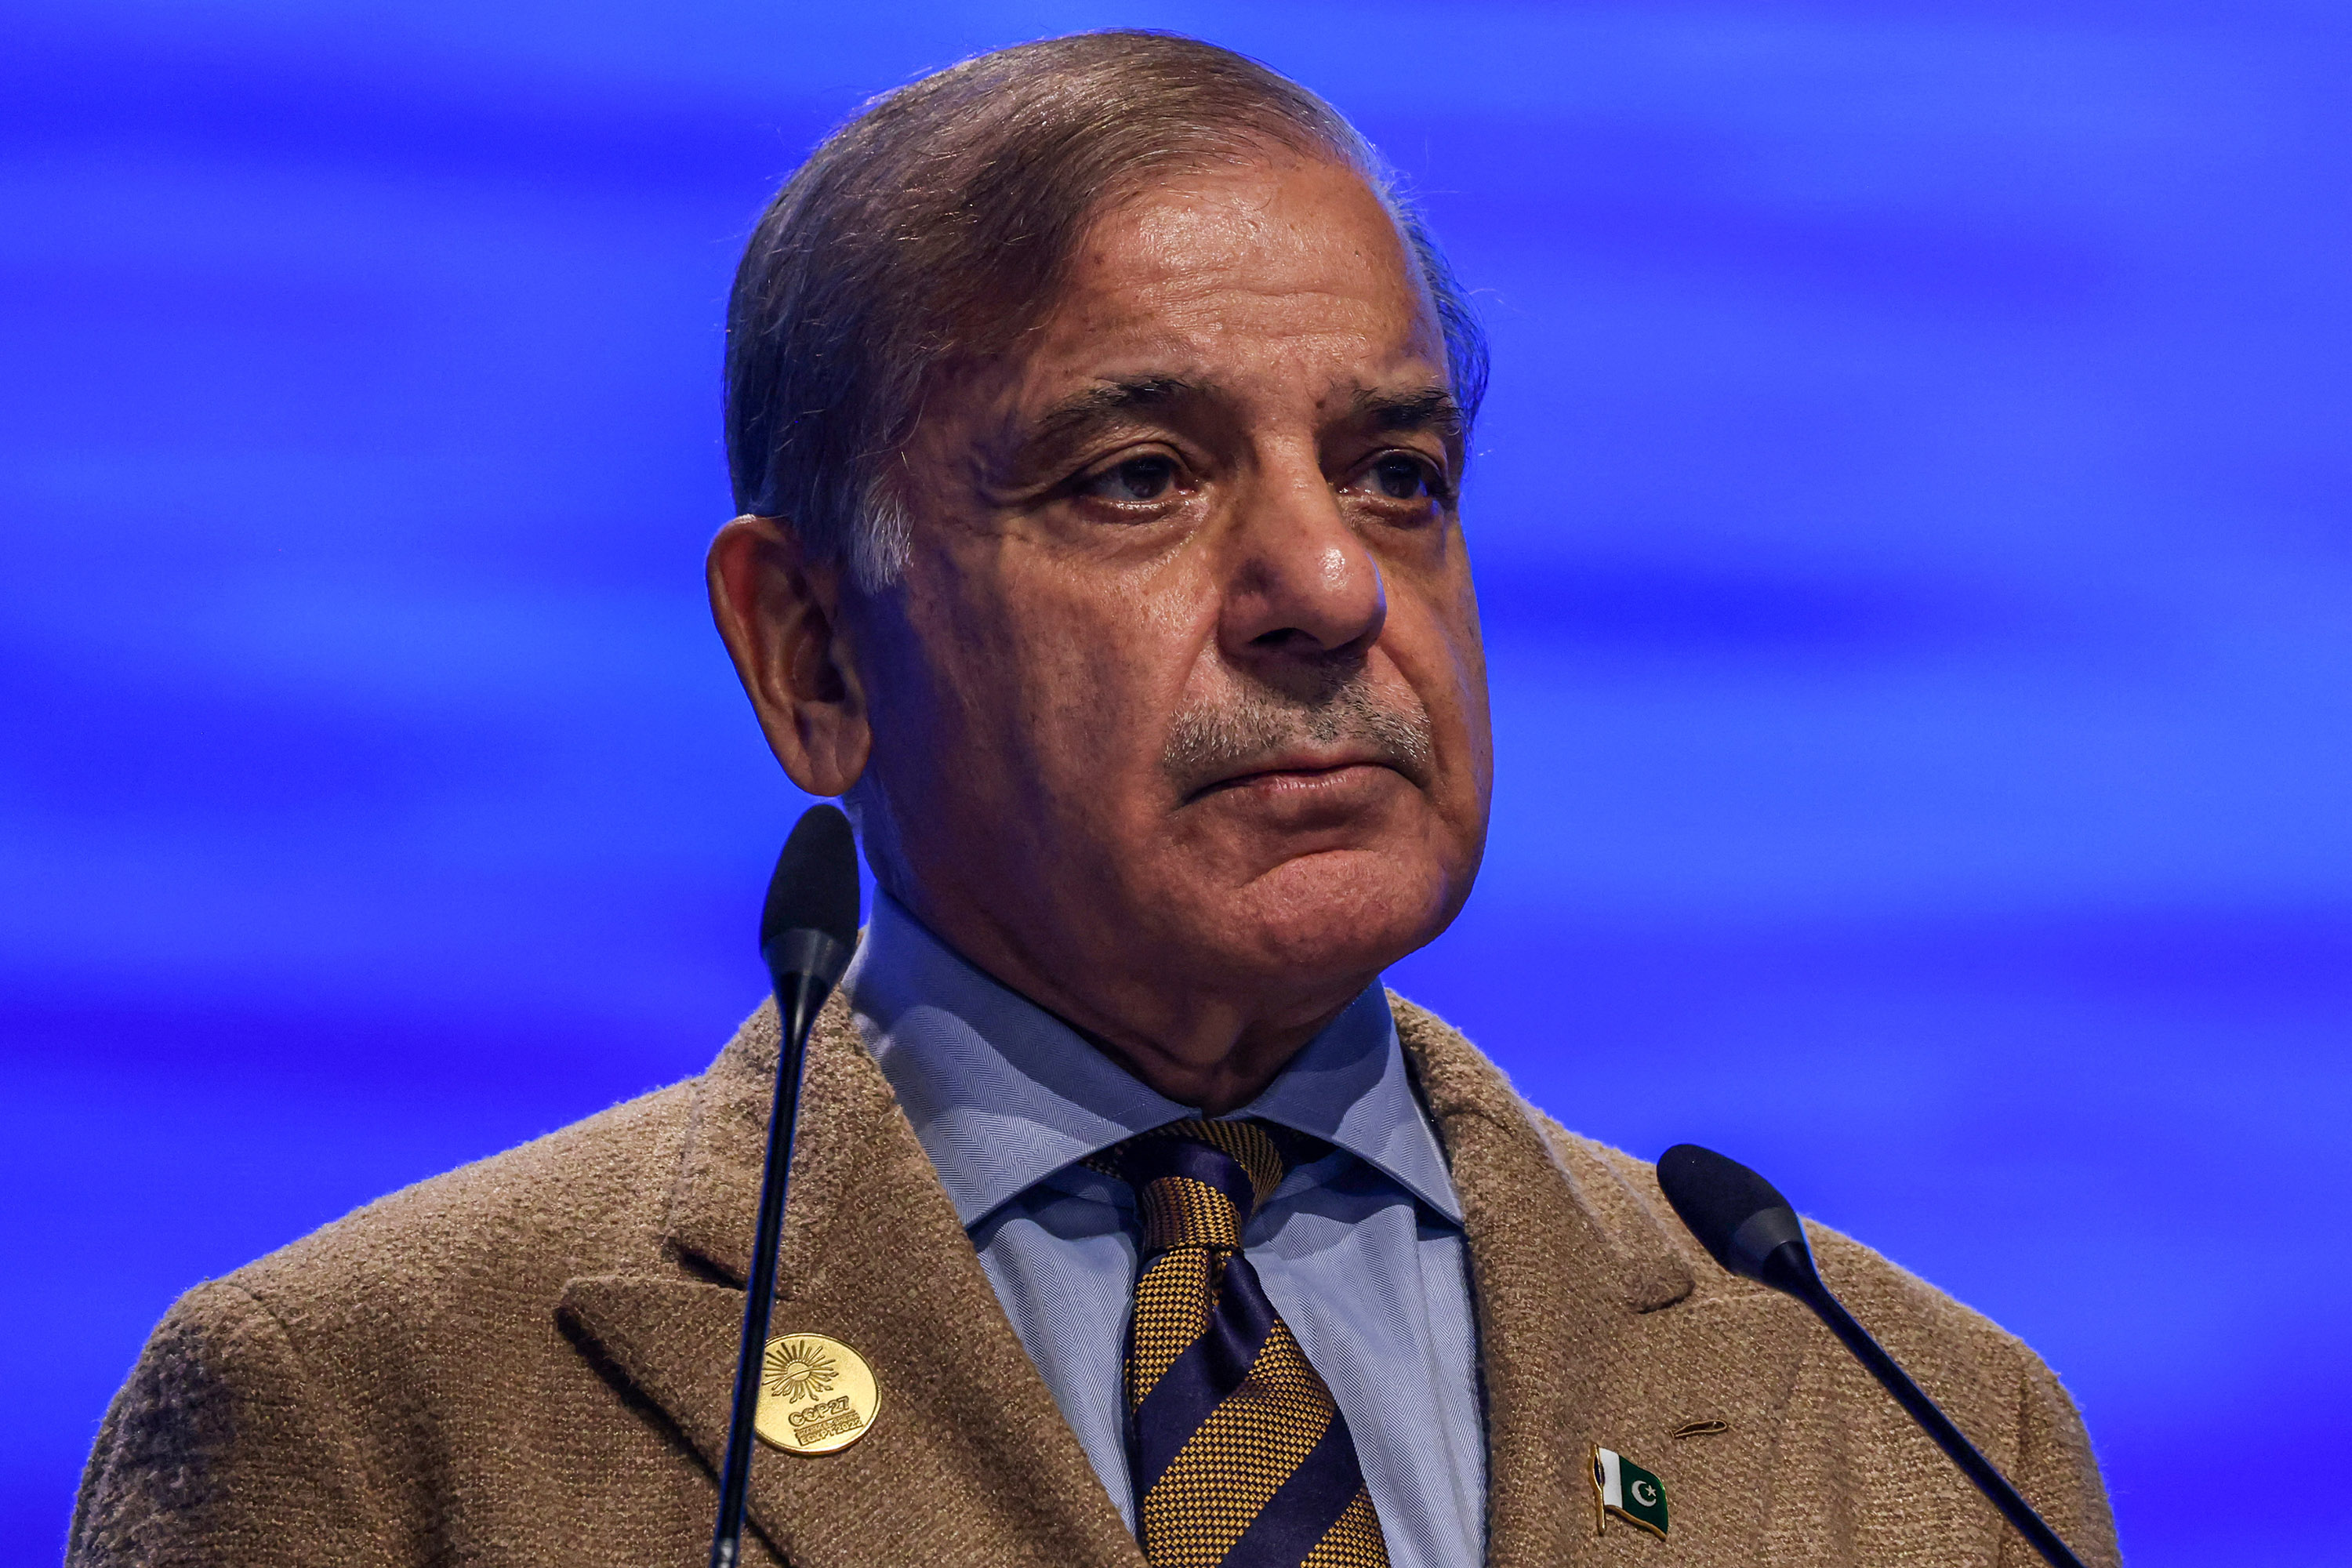 Pakistan's Prime Minister Shehbaz Sharif delivers a speech at the leaders summit of the COP27 climate conference on November 8, 2022.